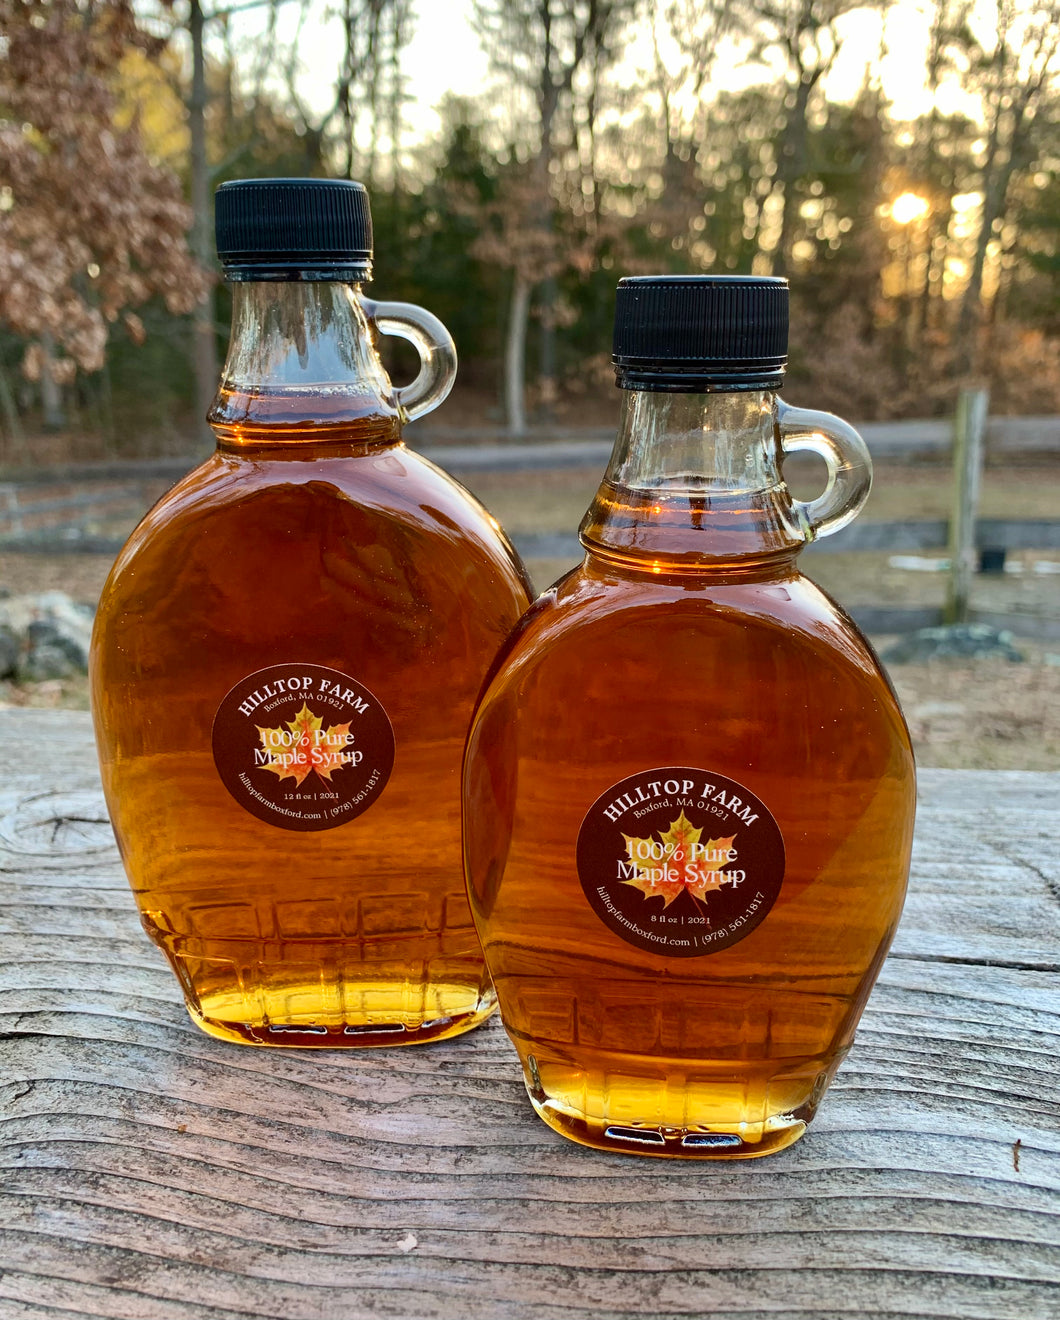 100% Pure Maple Syrup